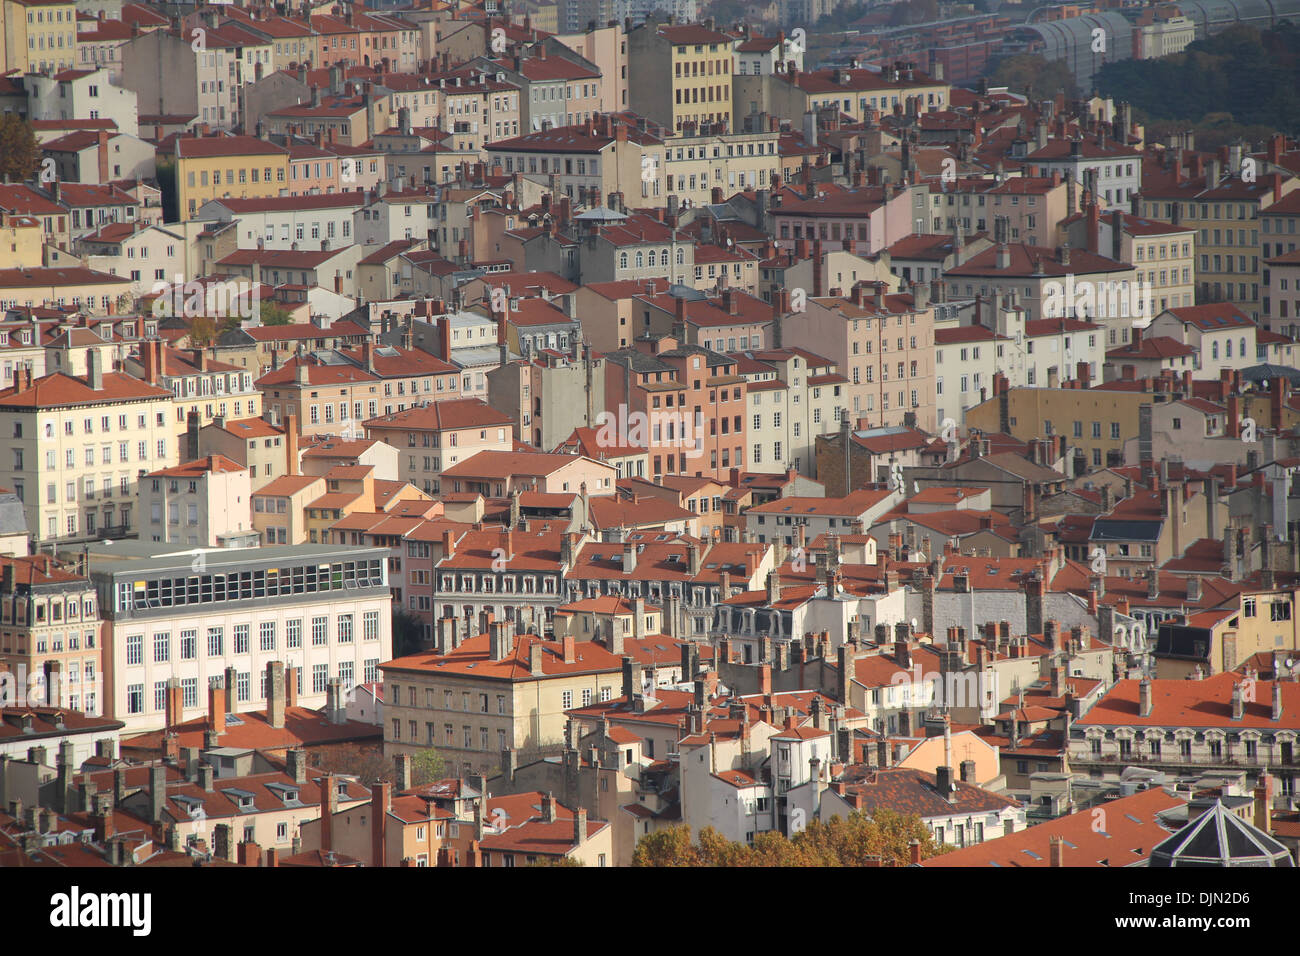 City Of Lyon France Showing Densely Populated Area Stock Photo